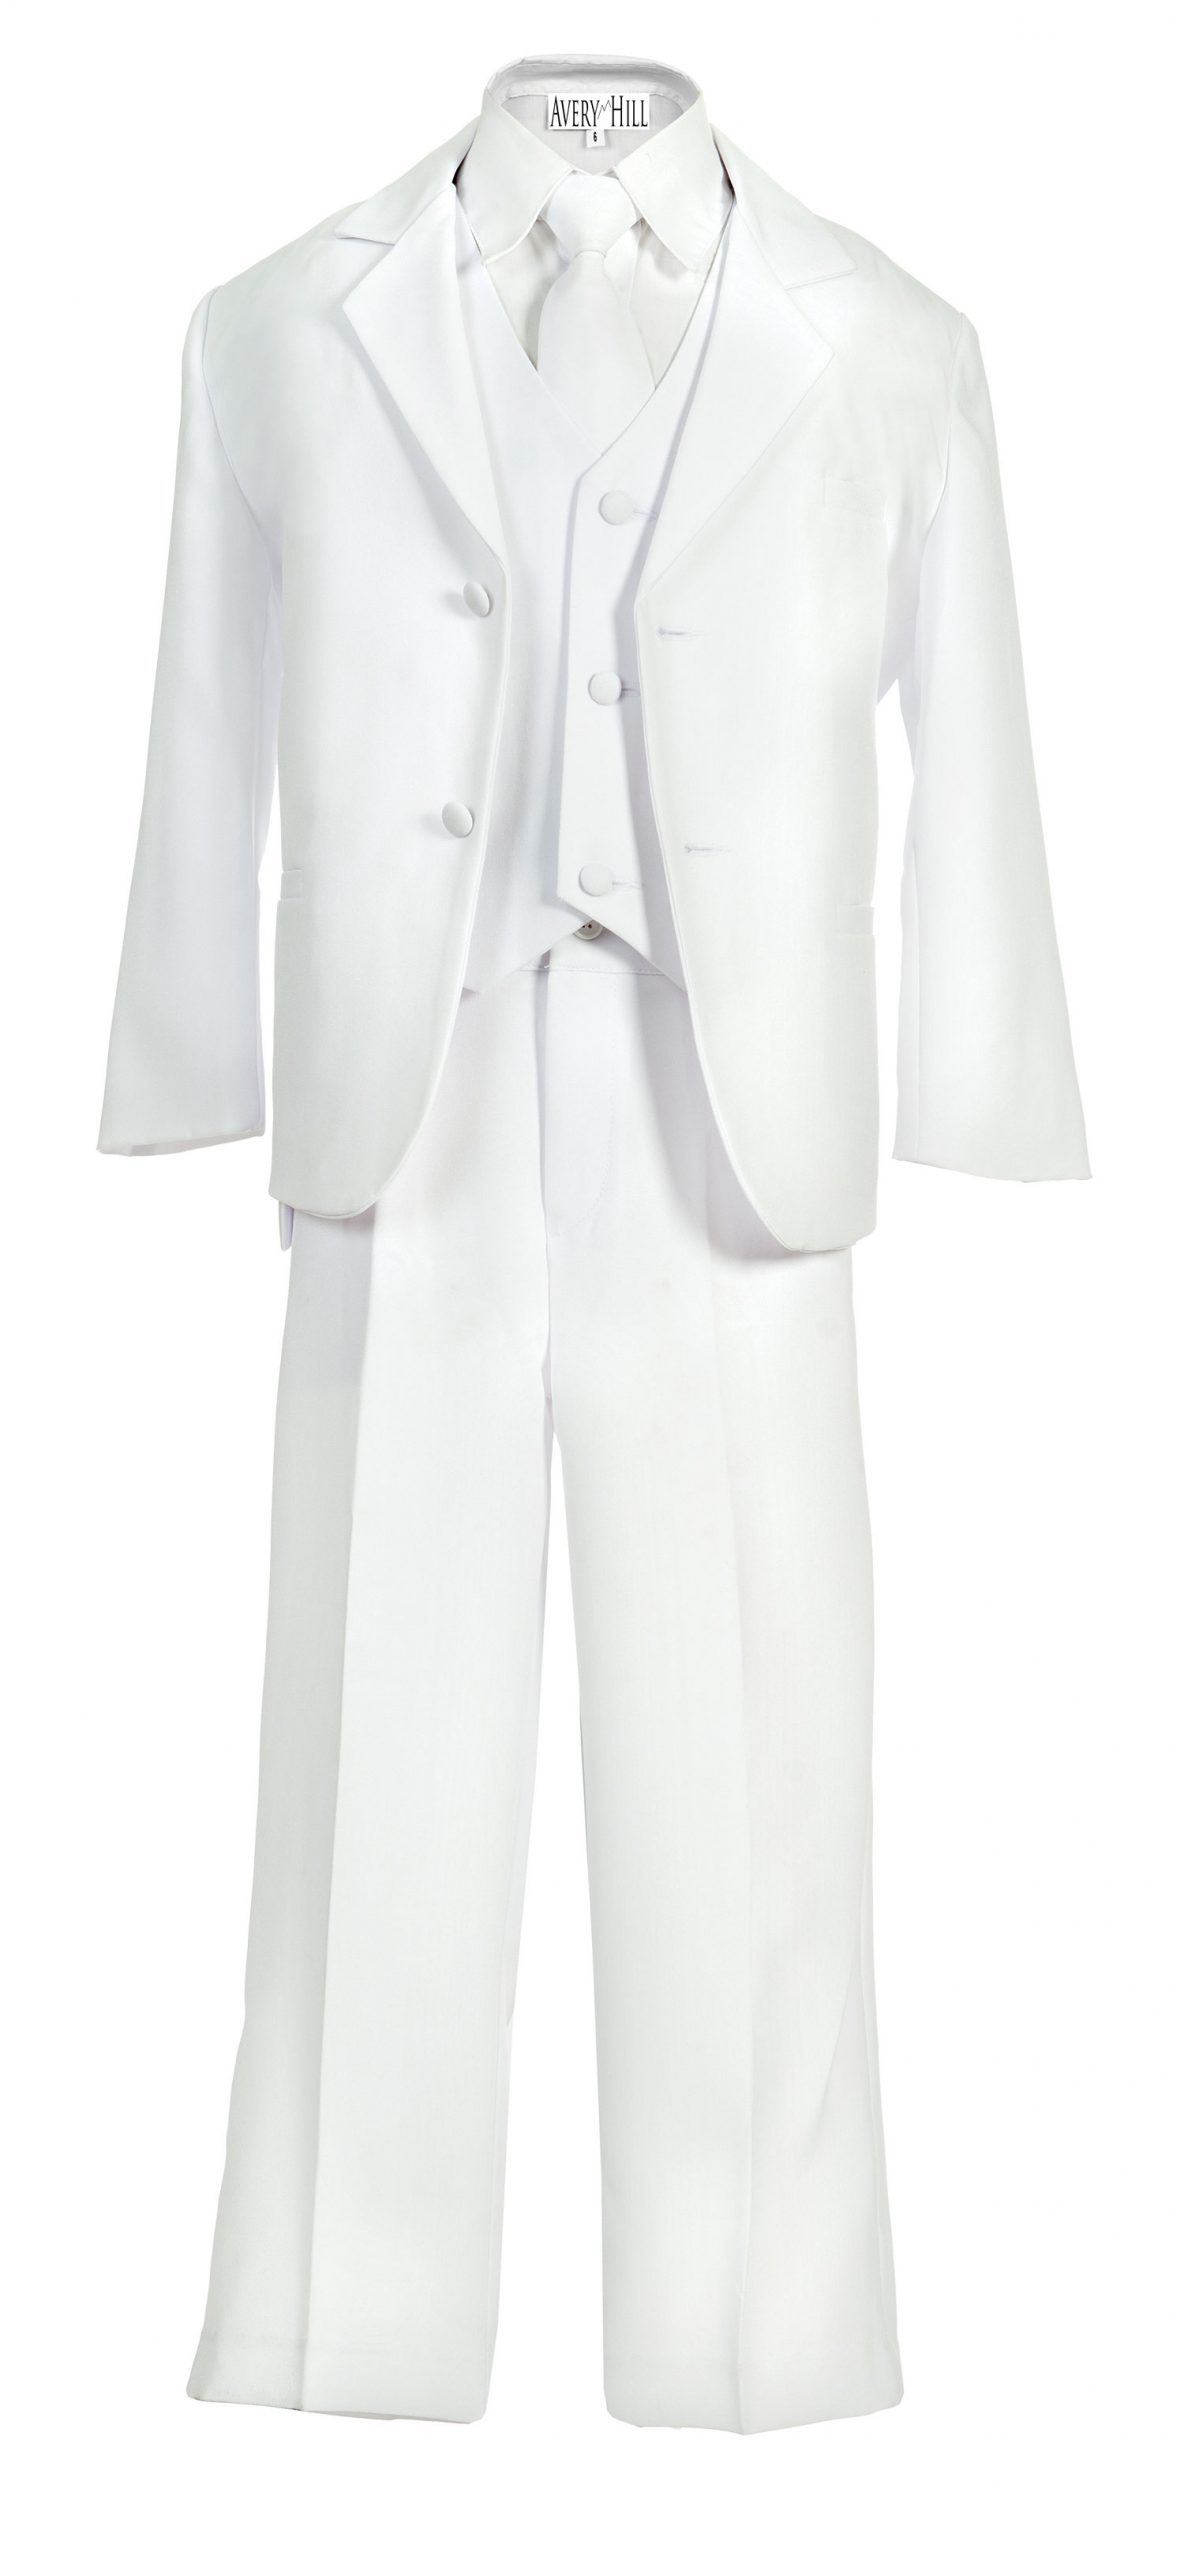 Avery Hill Boys Formal 5 Piece Suit with Shirt and Vest White - XL